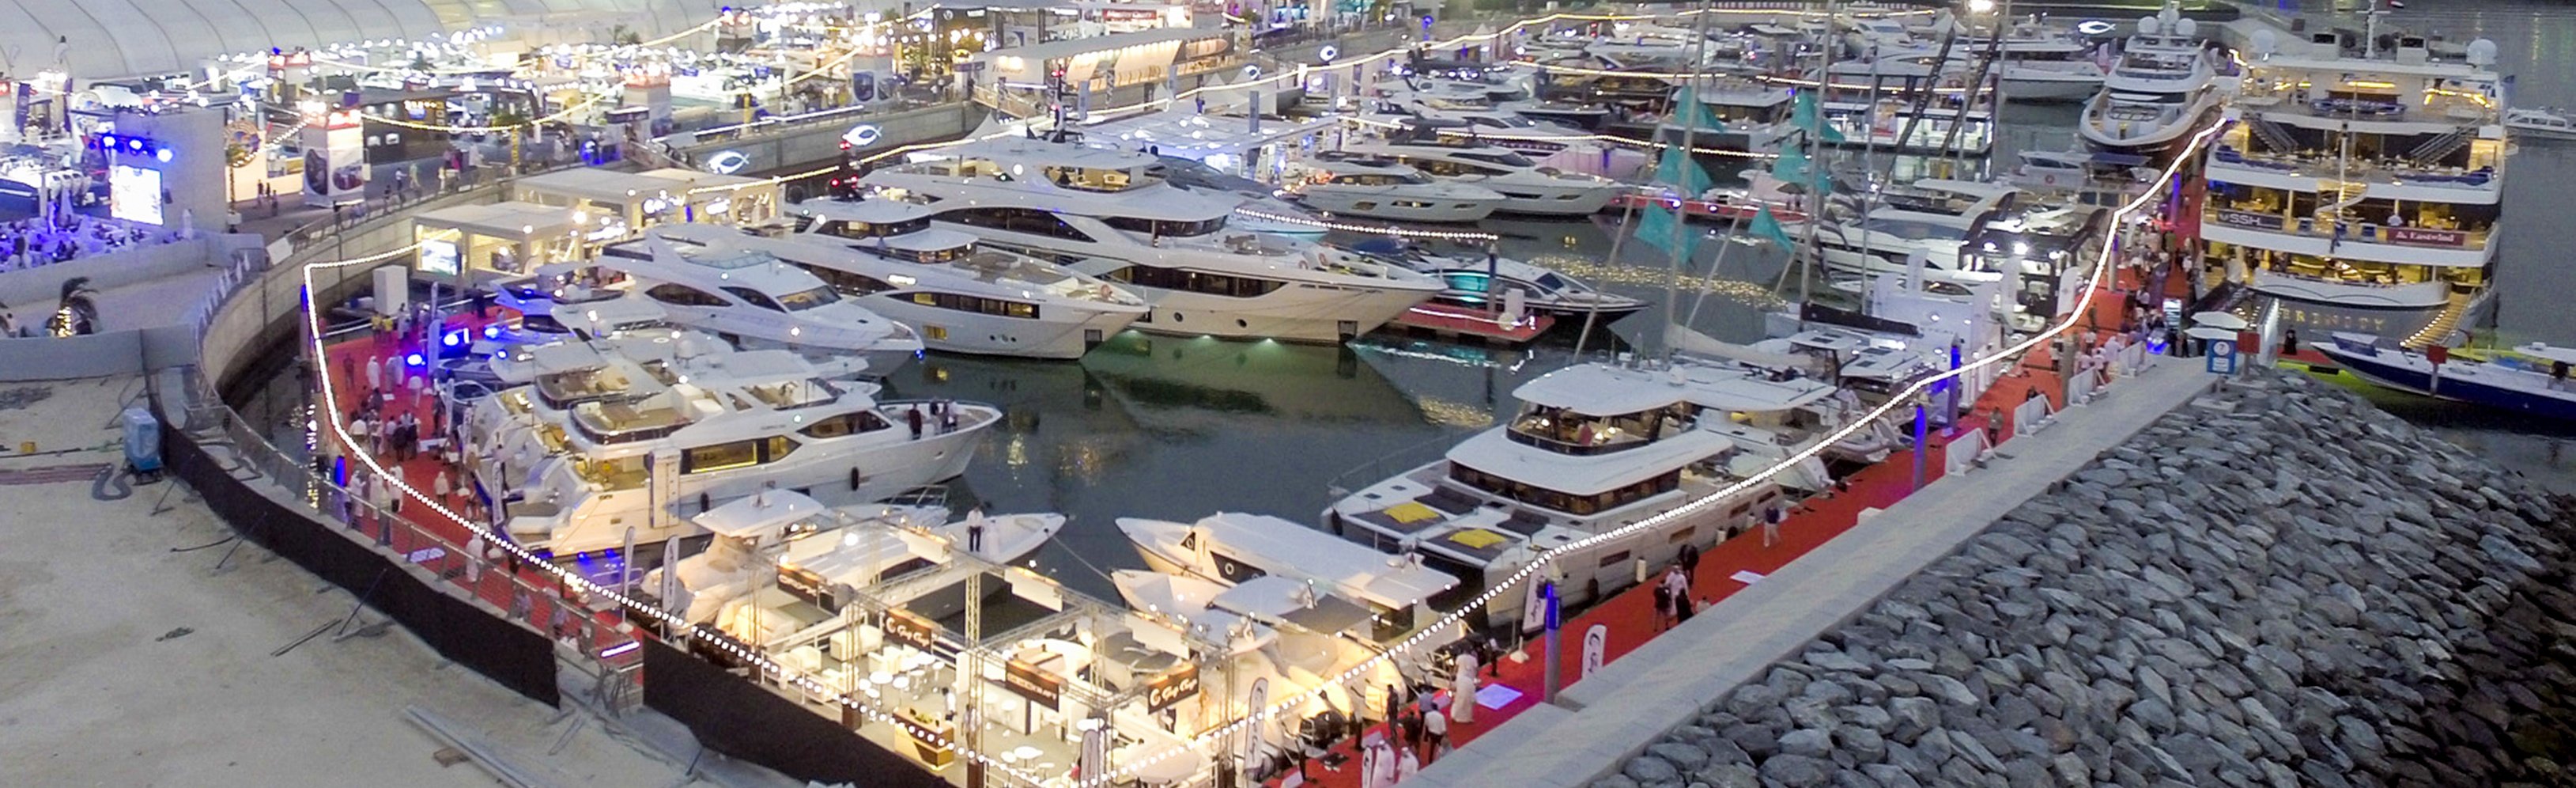 Gulf-Craft's-Yachts-and-Boats-at-the-Dubai-International-Boat-Show-2018-(3)